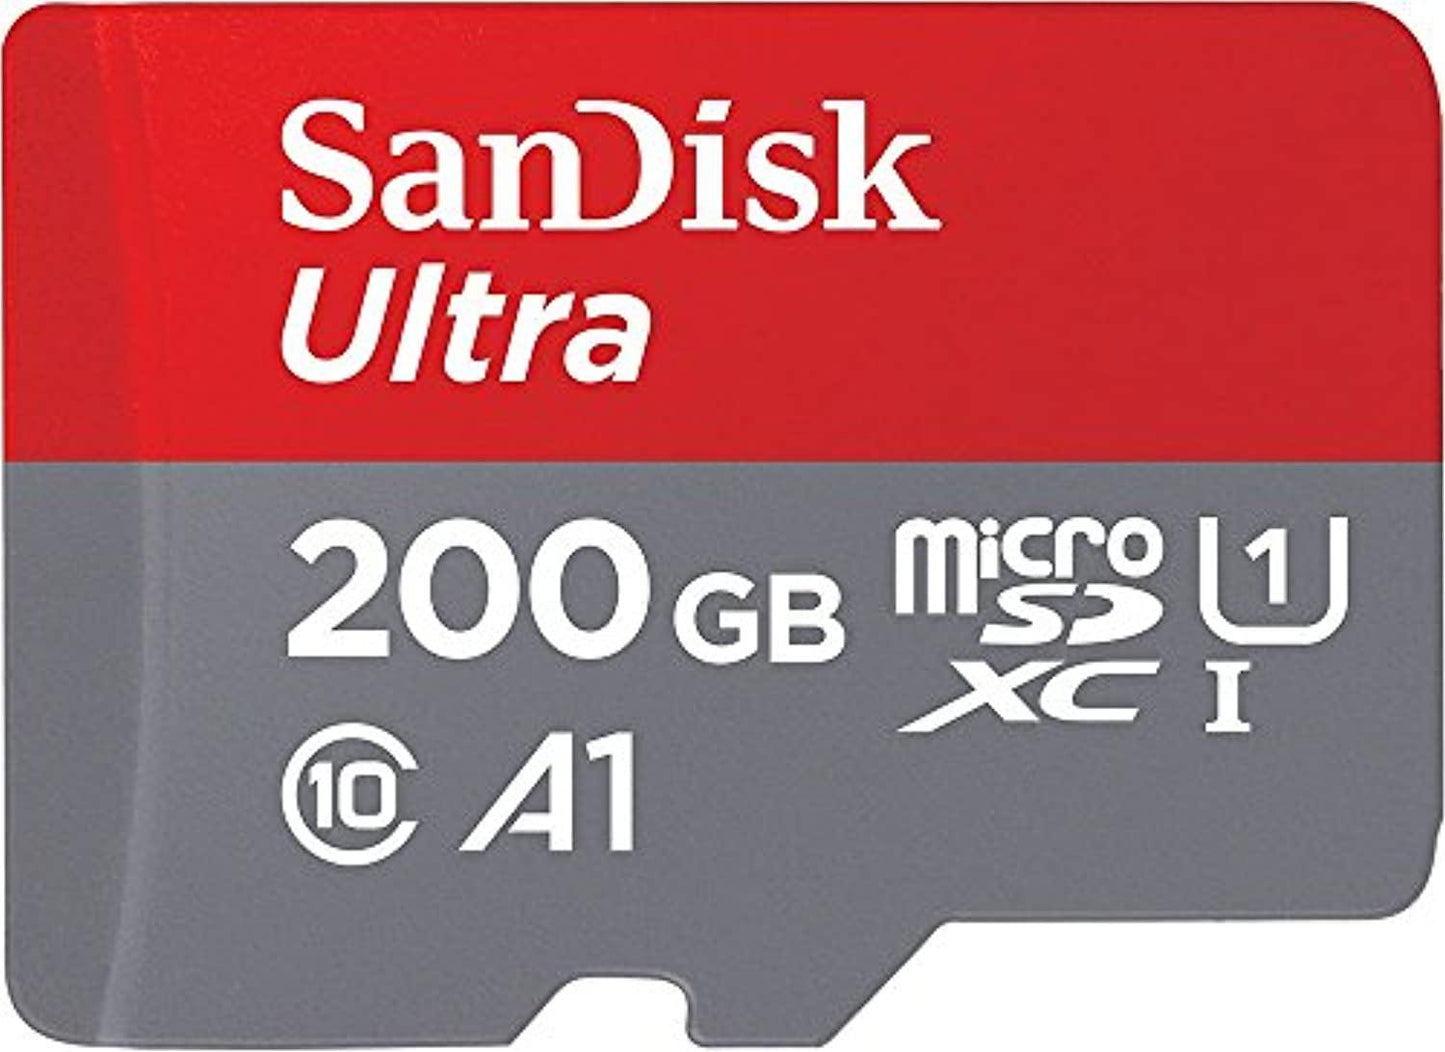 SanDisk Ultra 200 GB microSDXC Memory Card + SD Adapter with A1 App Performance Up to 100 MB/s, Class 10, U1 (USED) - Offer Games